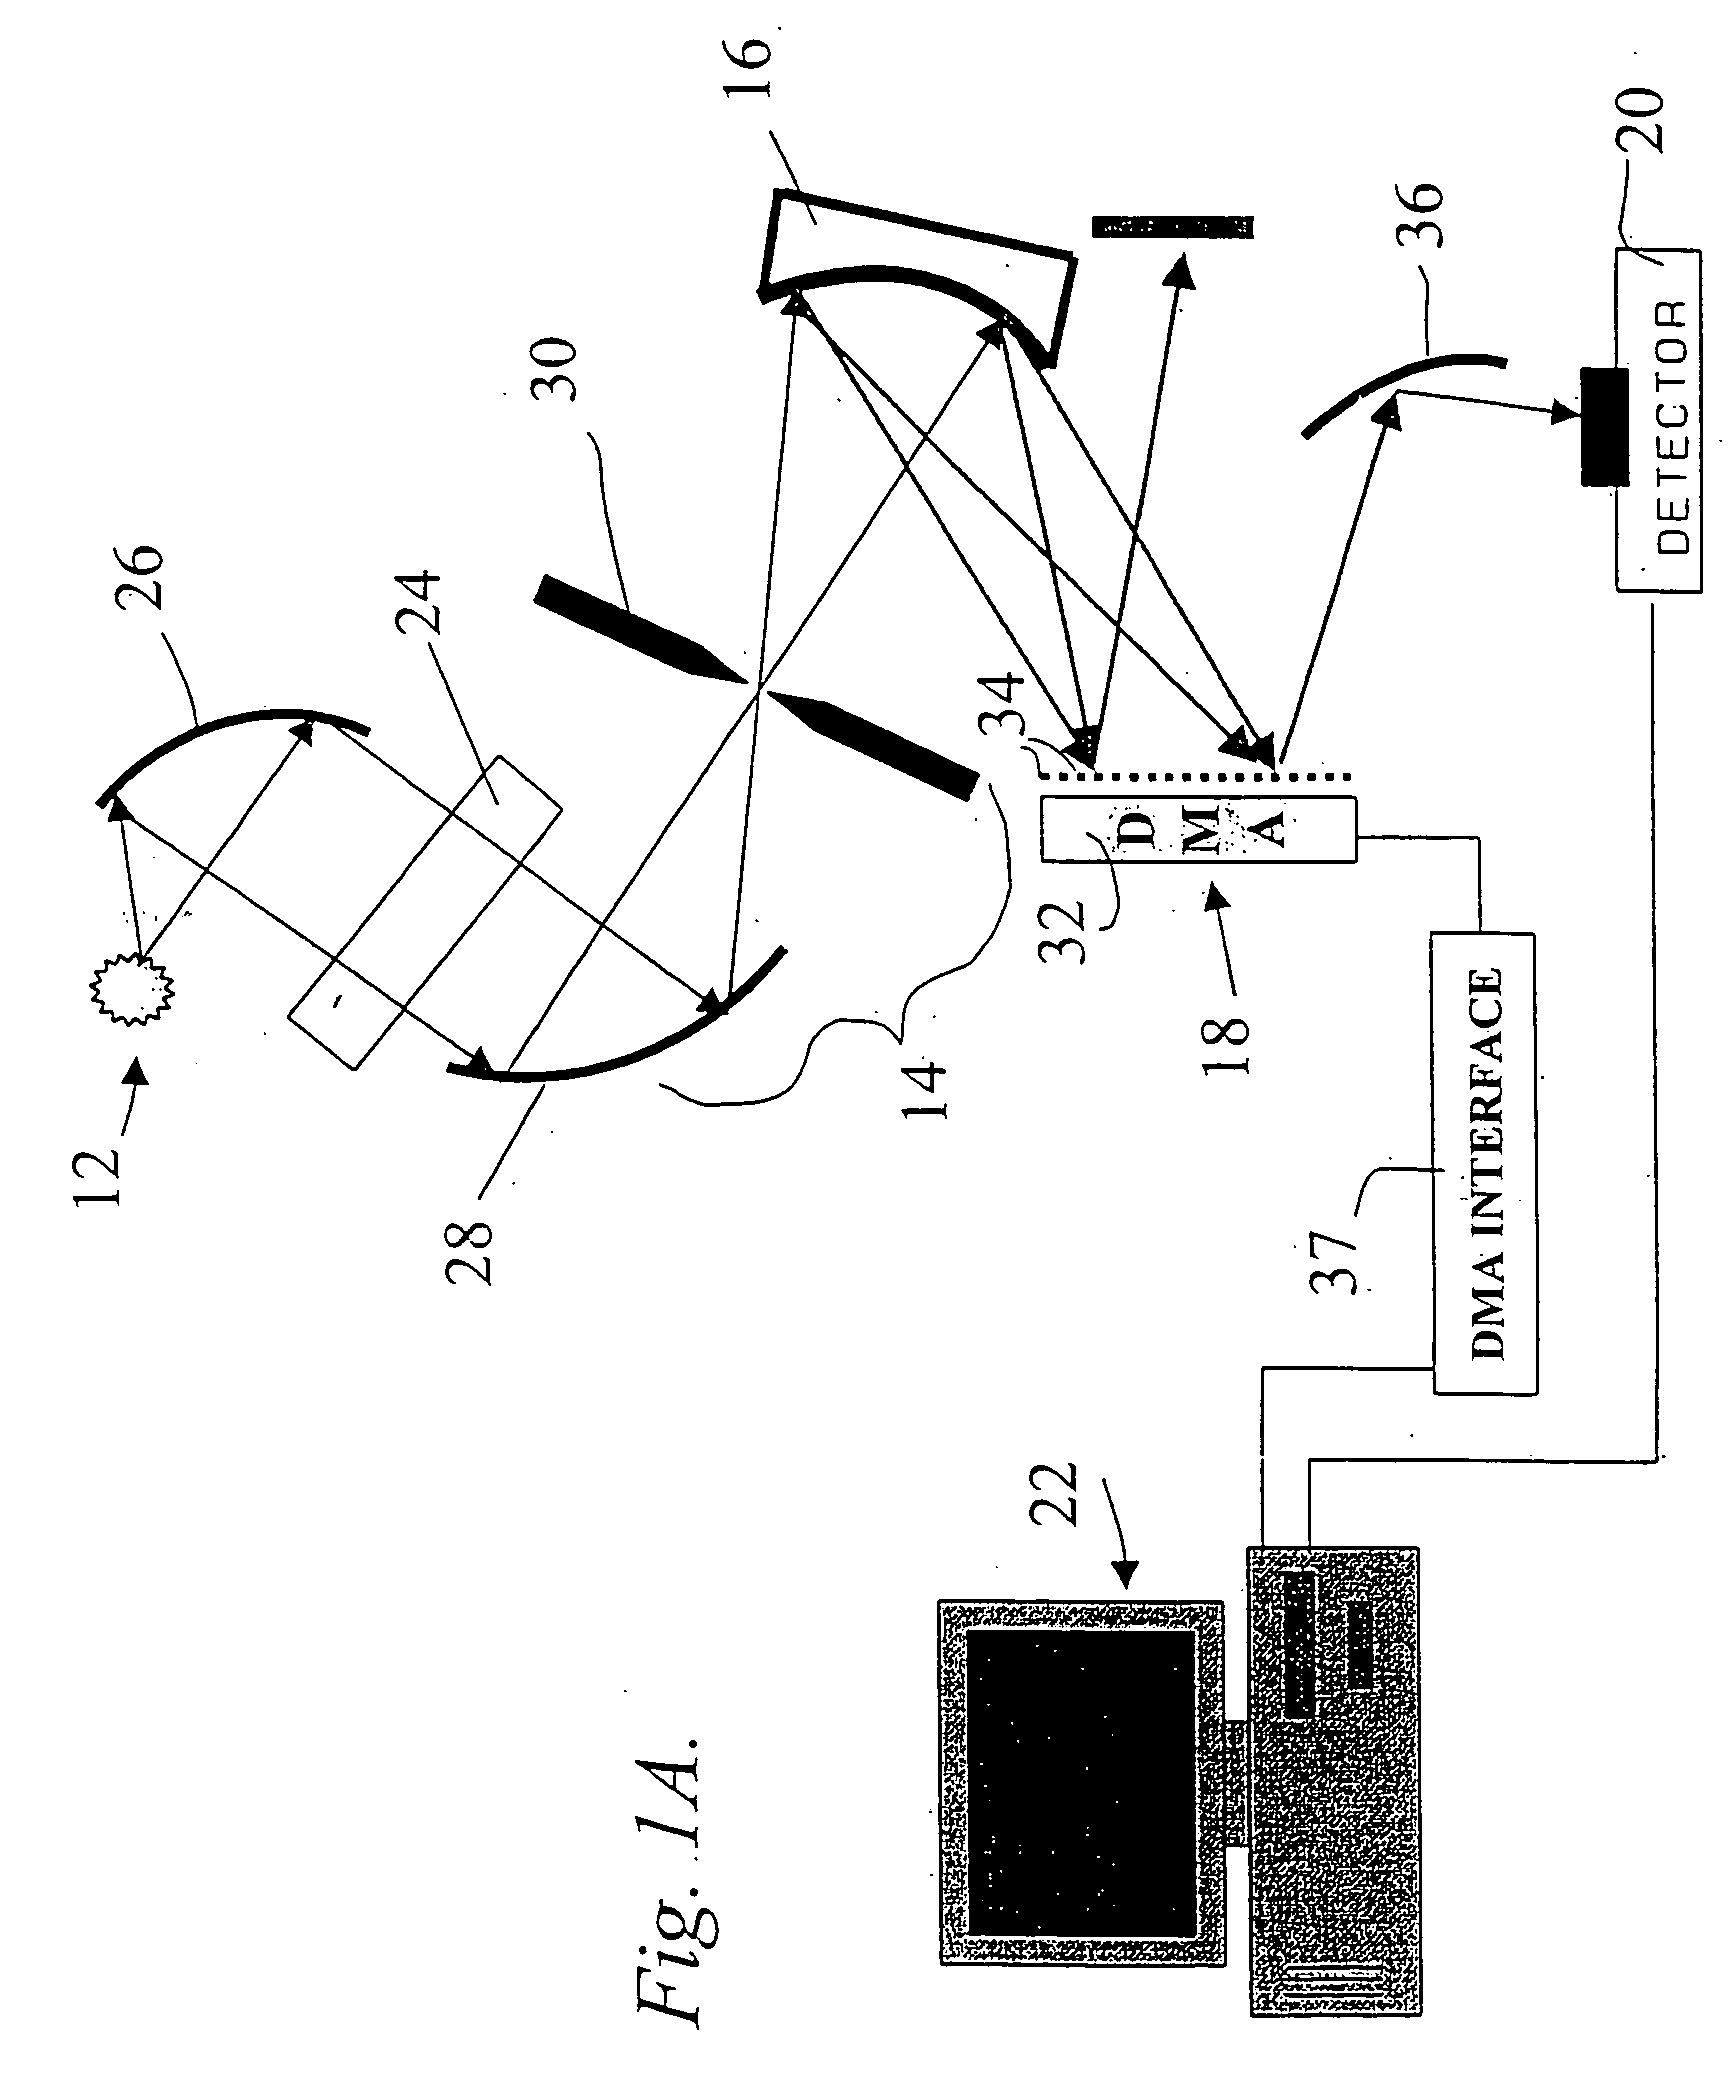 System and method for hyper-spectral analysis